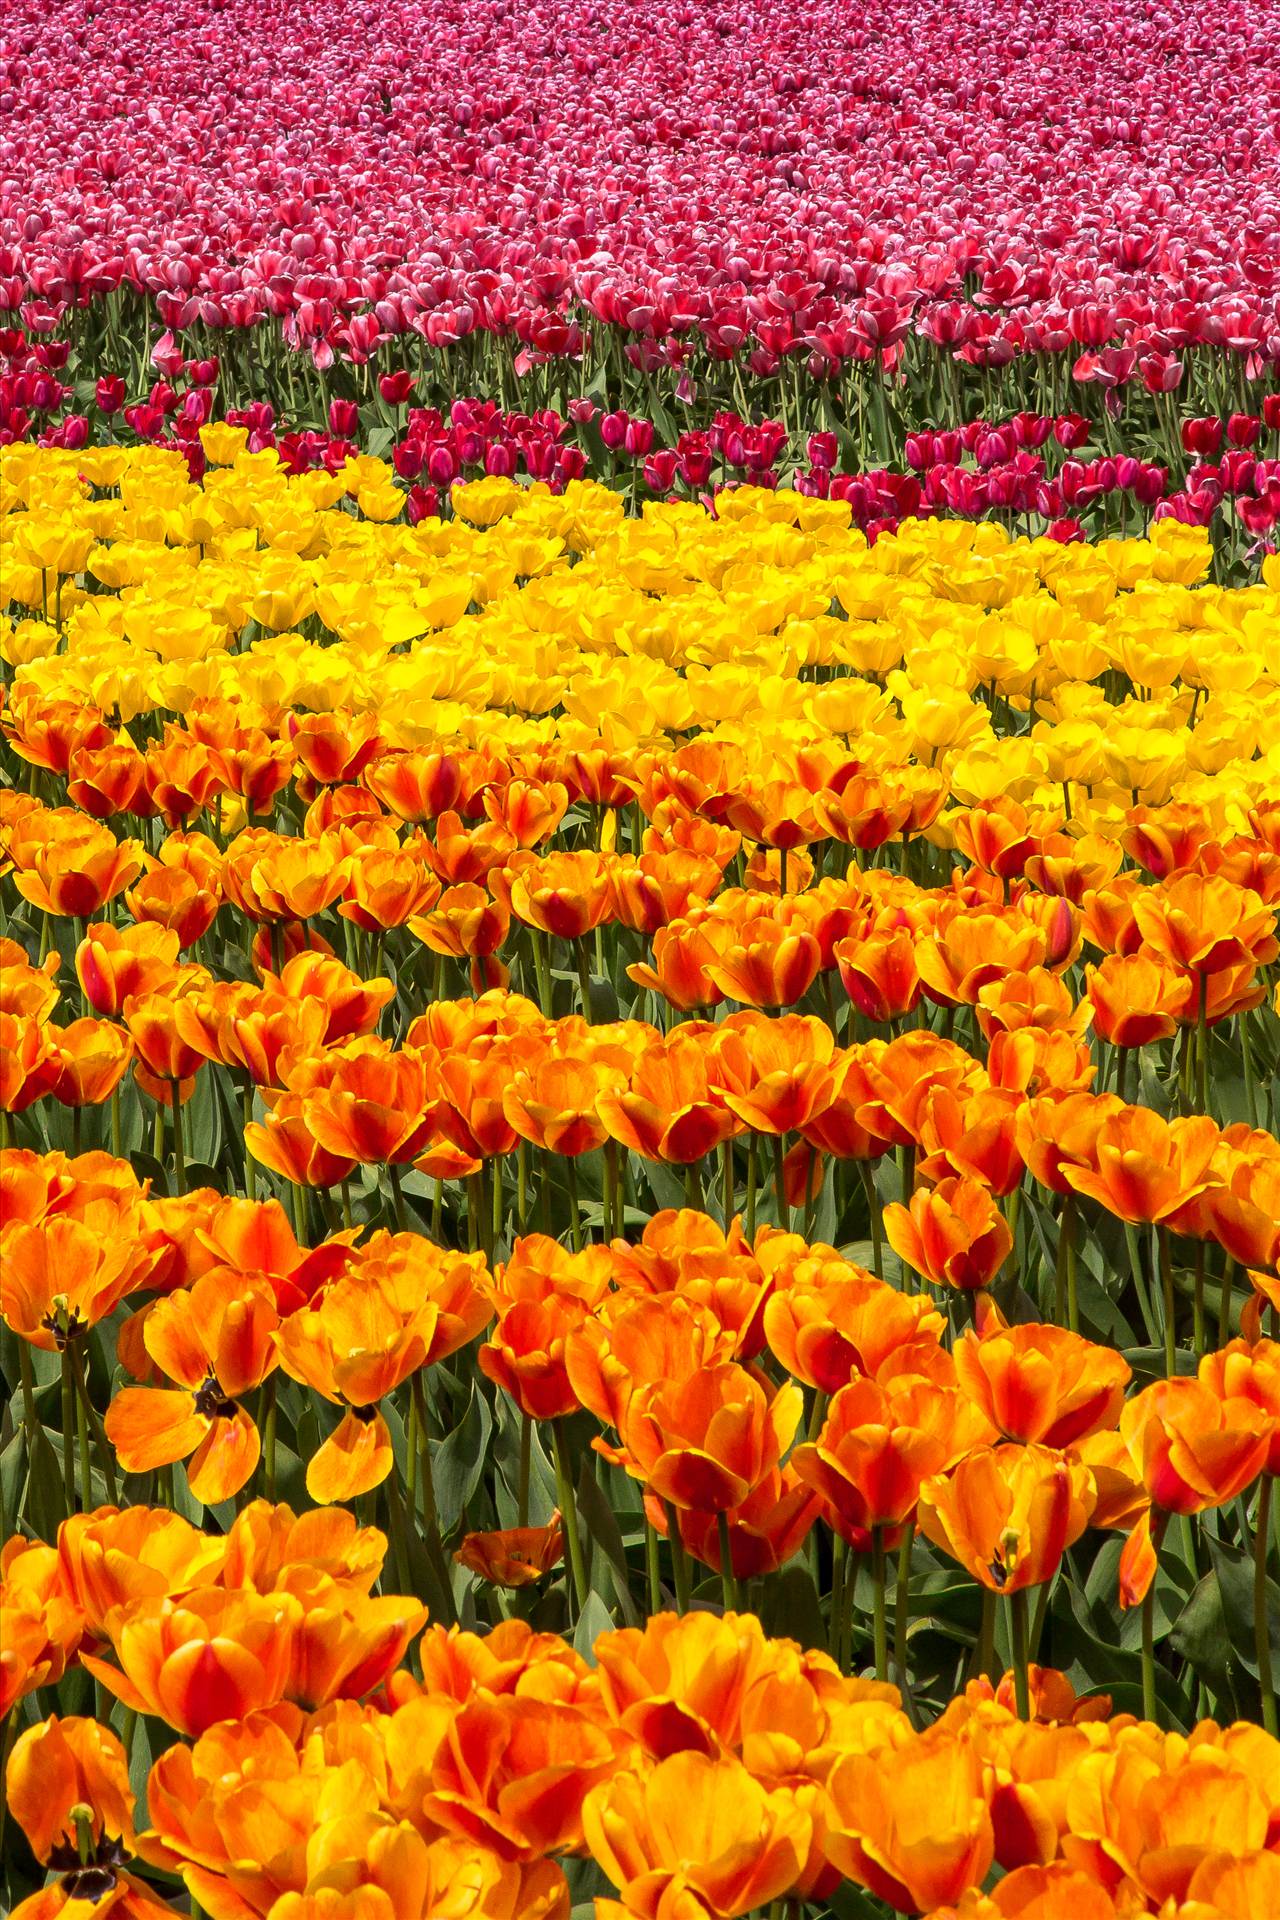 Tulips 4 - From the 2012 Skagit County Tulip Festival. by Scott Smith Photos